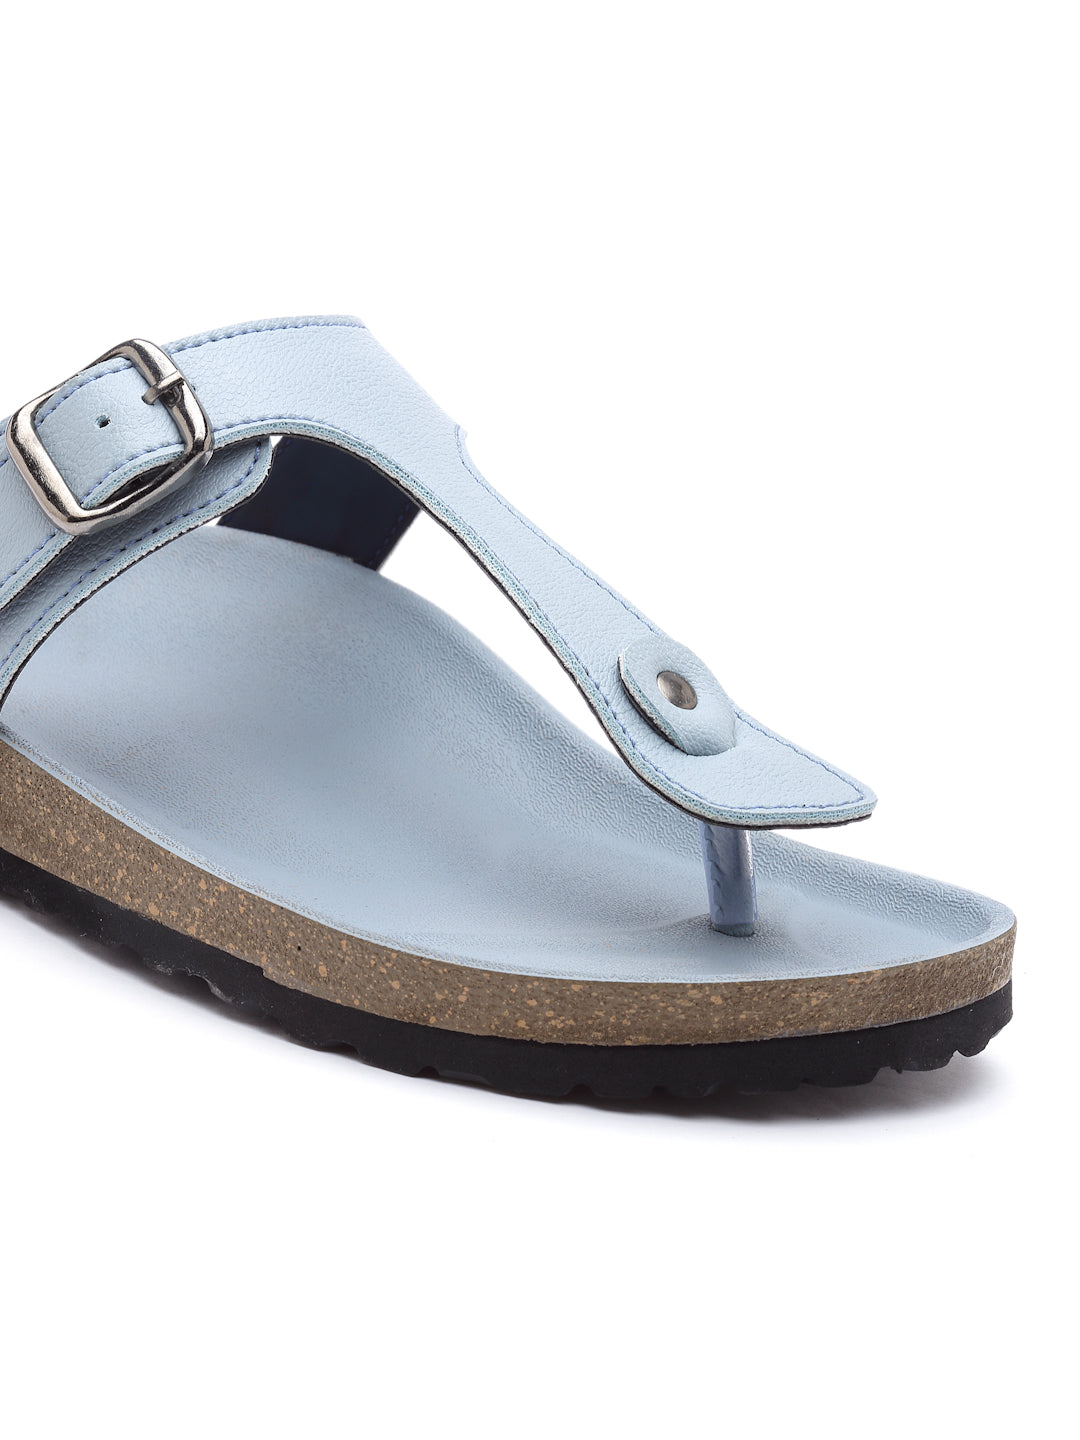 Women's Outdoor | Trendy | Stylish Powder-Blue Synthetic Leather Casual Sandal